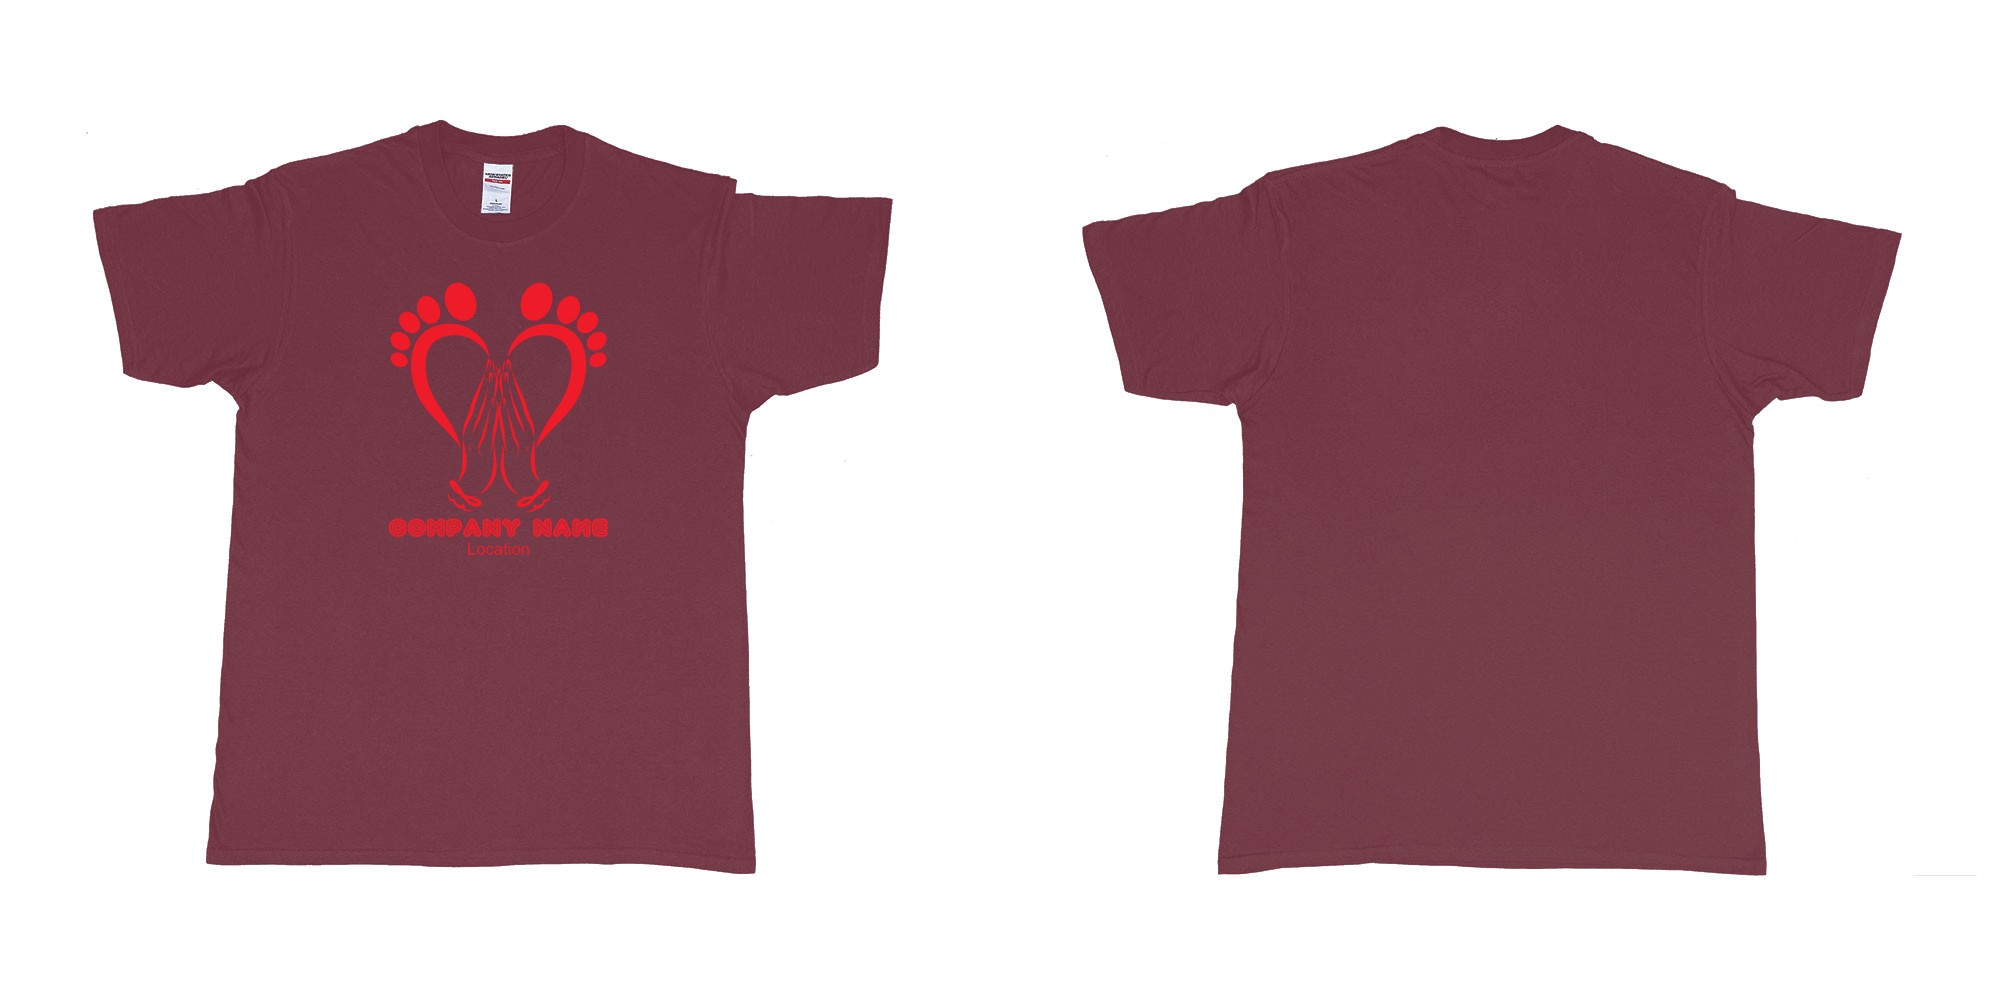 Custom tshirt design podiatrist chiropodist feet care specialist heart shaped feet with caring hands in fabric color marron choice your own text made in Bali by The Pirate Way